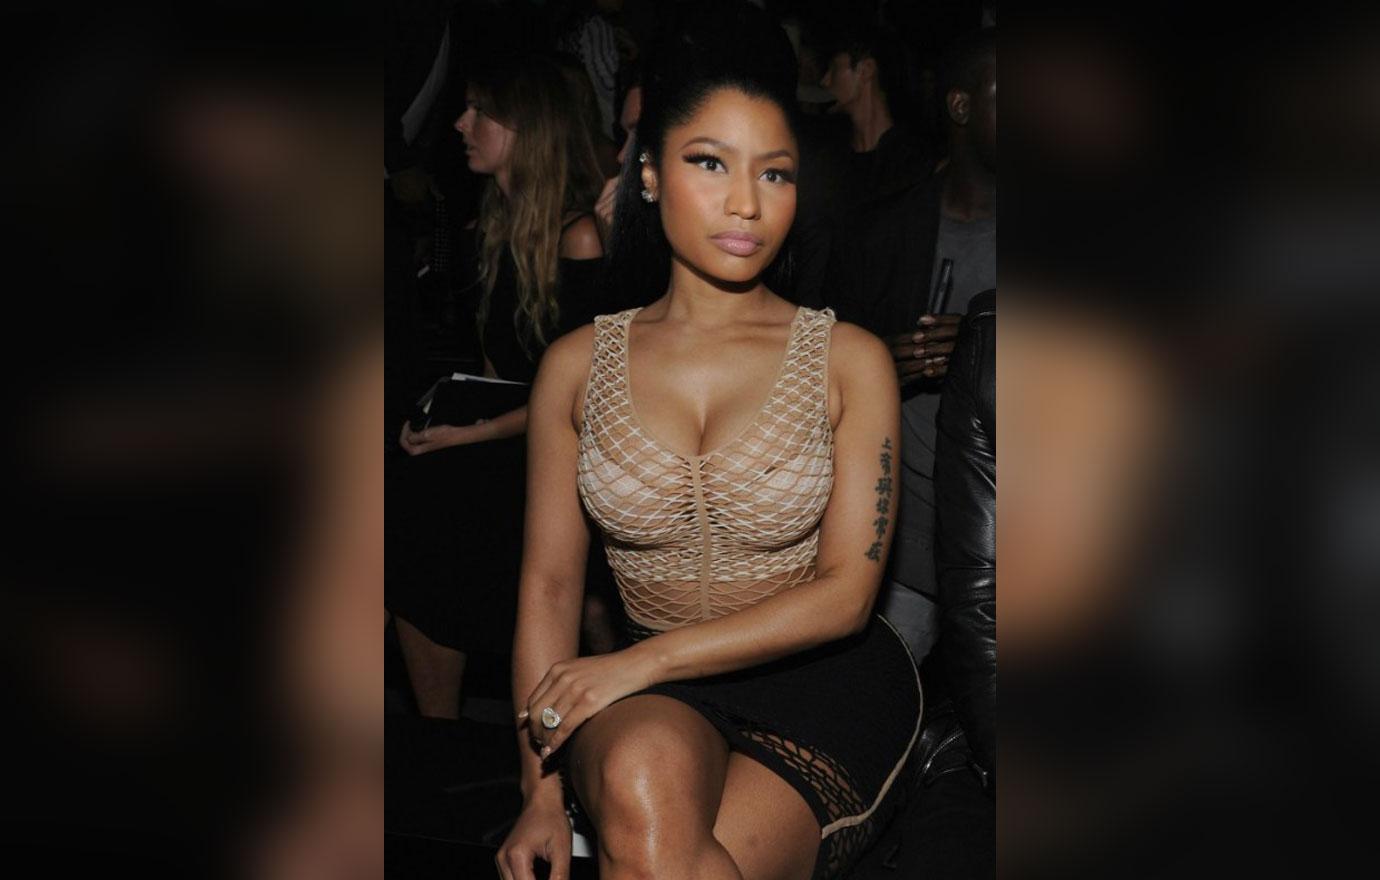 Busting Out! The Greatest Celebrity Nip Slips Of All Times Exposed